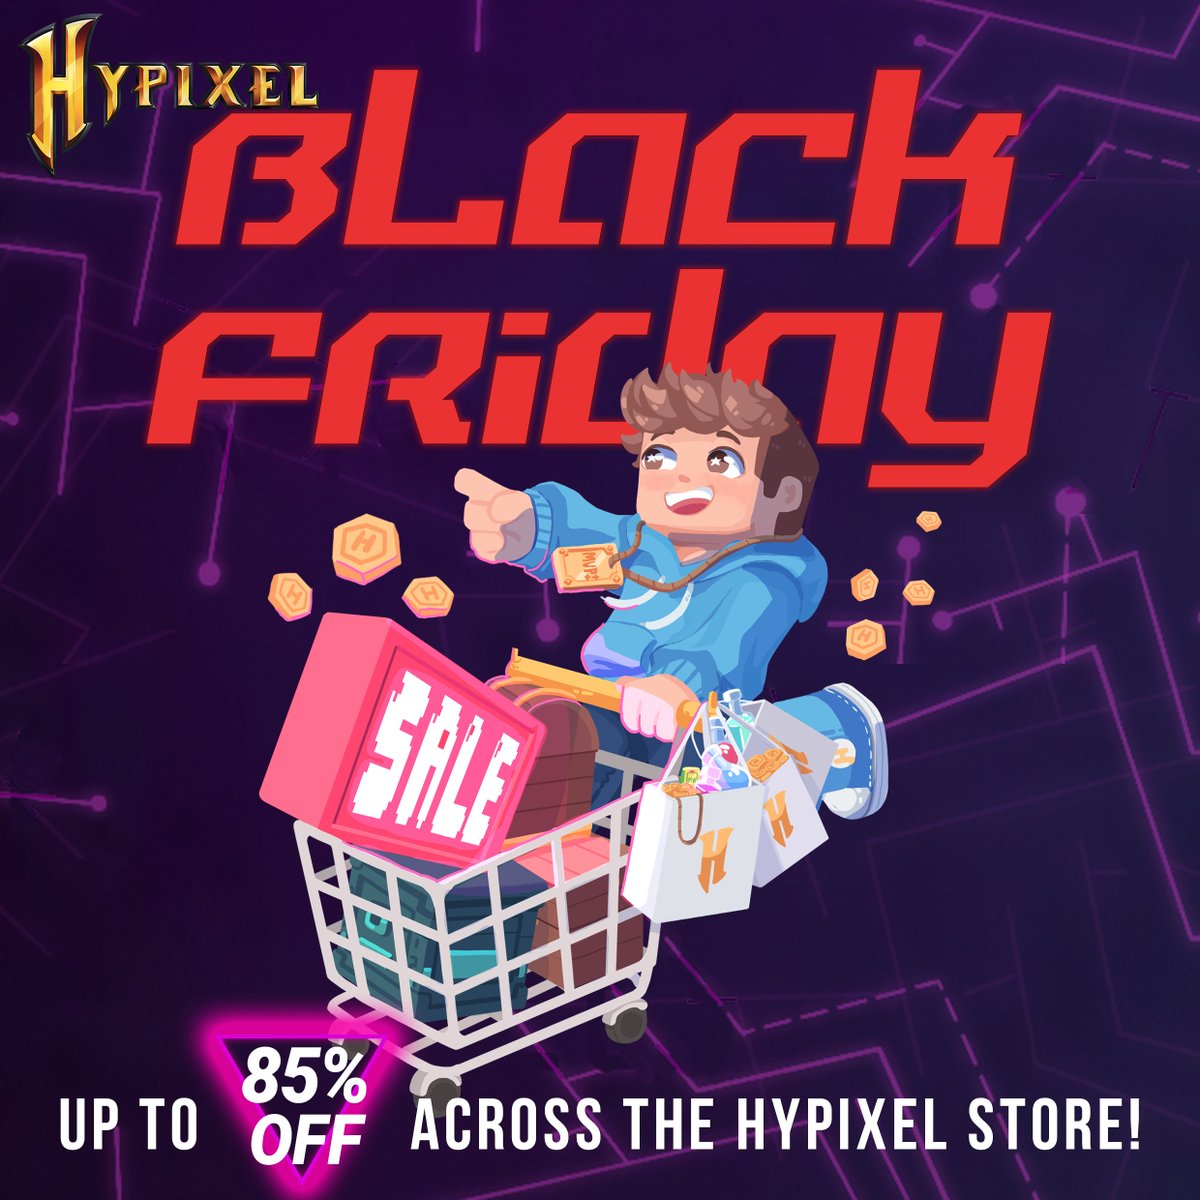 From now 'til Tuesday, have some sick savings on the Hypixel Store! Our Black Friday deals have started and you could have some great deals on Ranks, Boosters, and more! Get yourself some savings today > store.hypixel.net